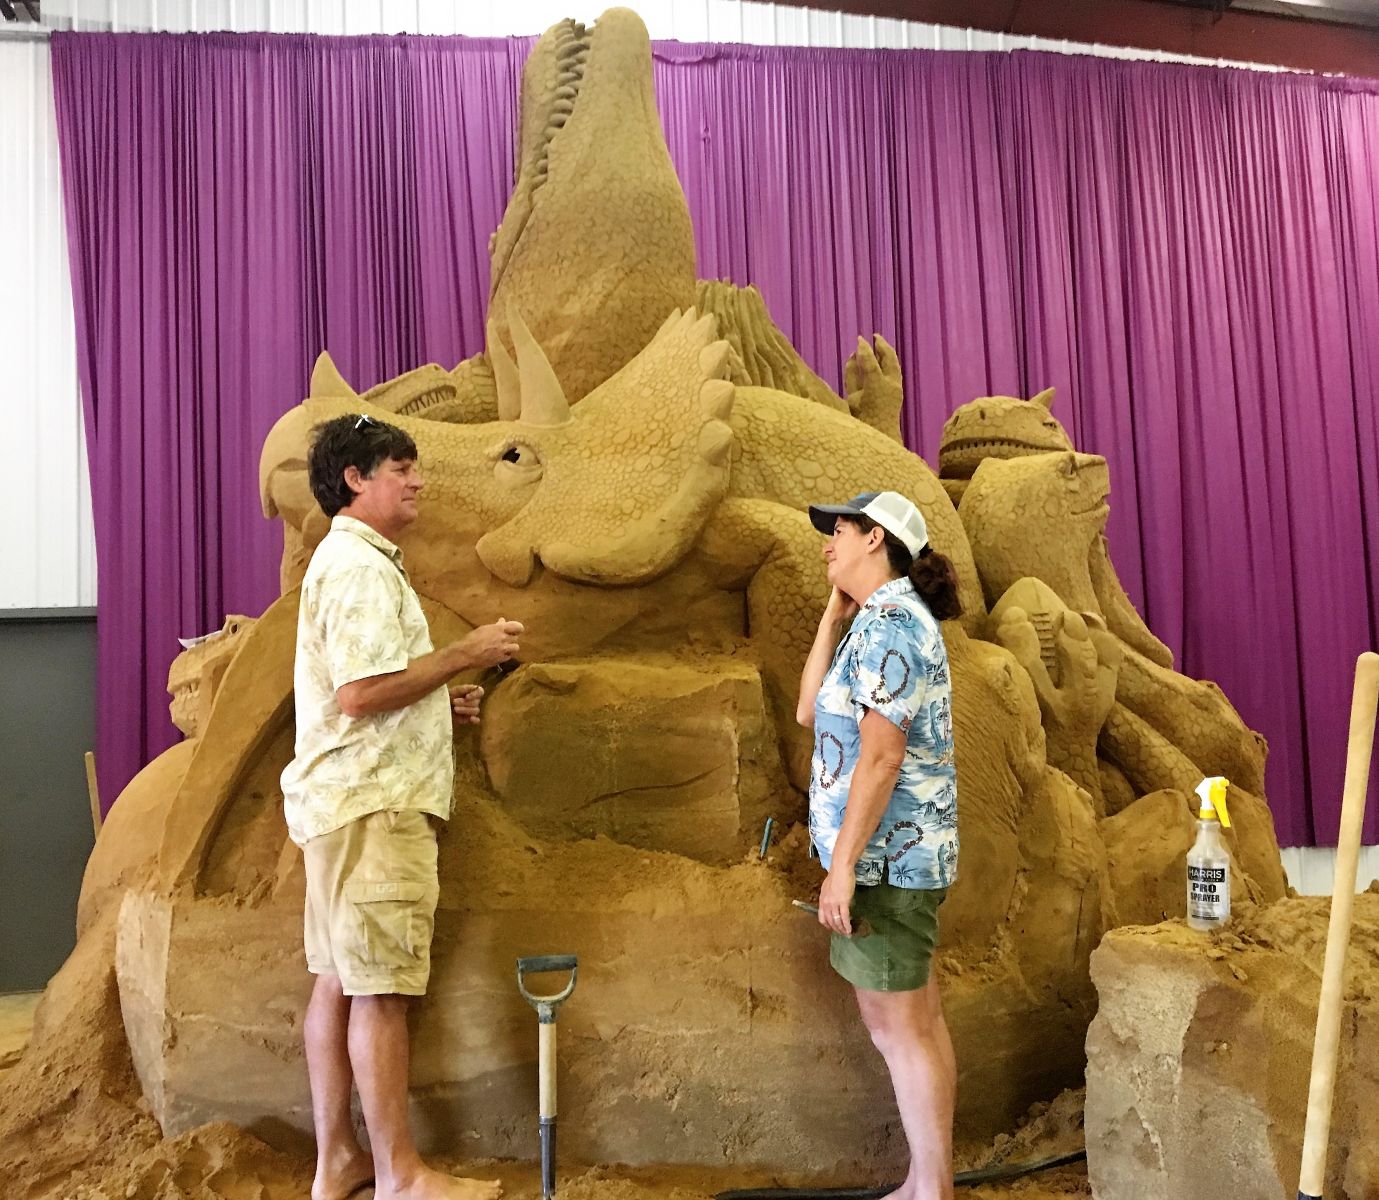 Husband-and-wife sand sculpting duo Greg and Brandi Glenn work on a dinsoaur-themed sculpture at the S.C. State Fair. (Photo/Melinda Waldrop)